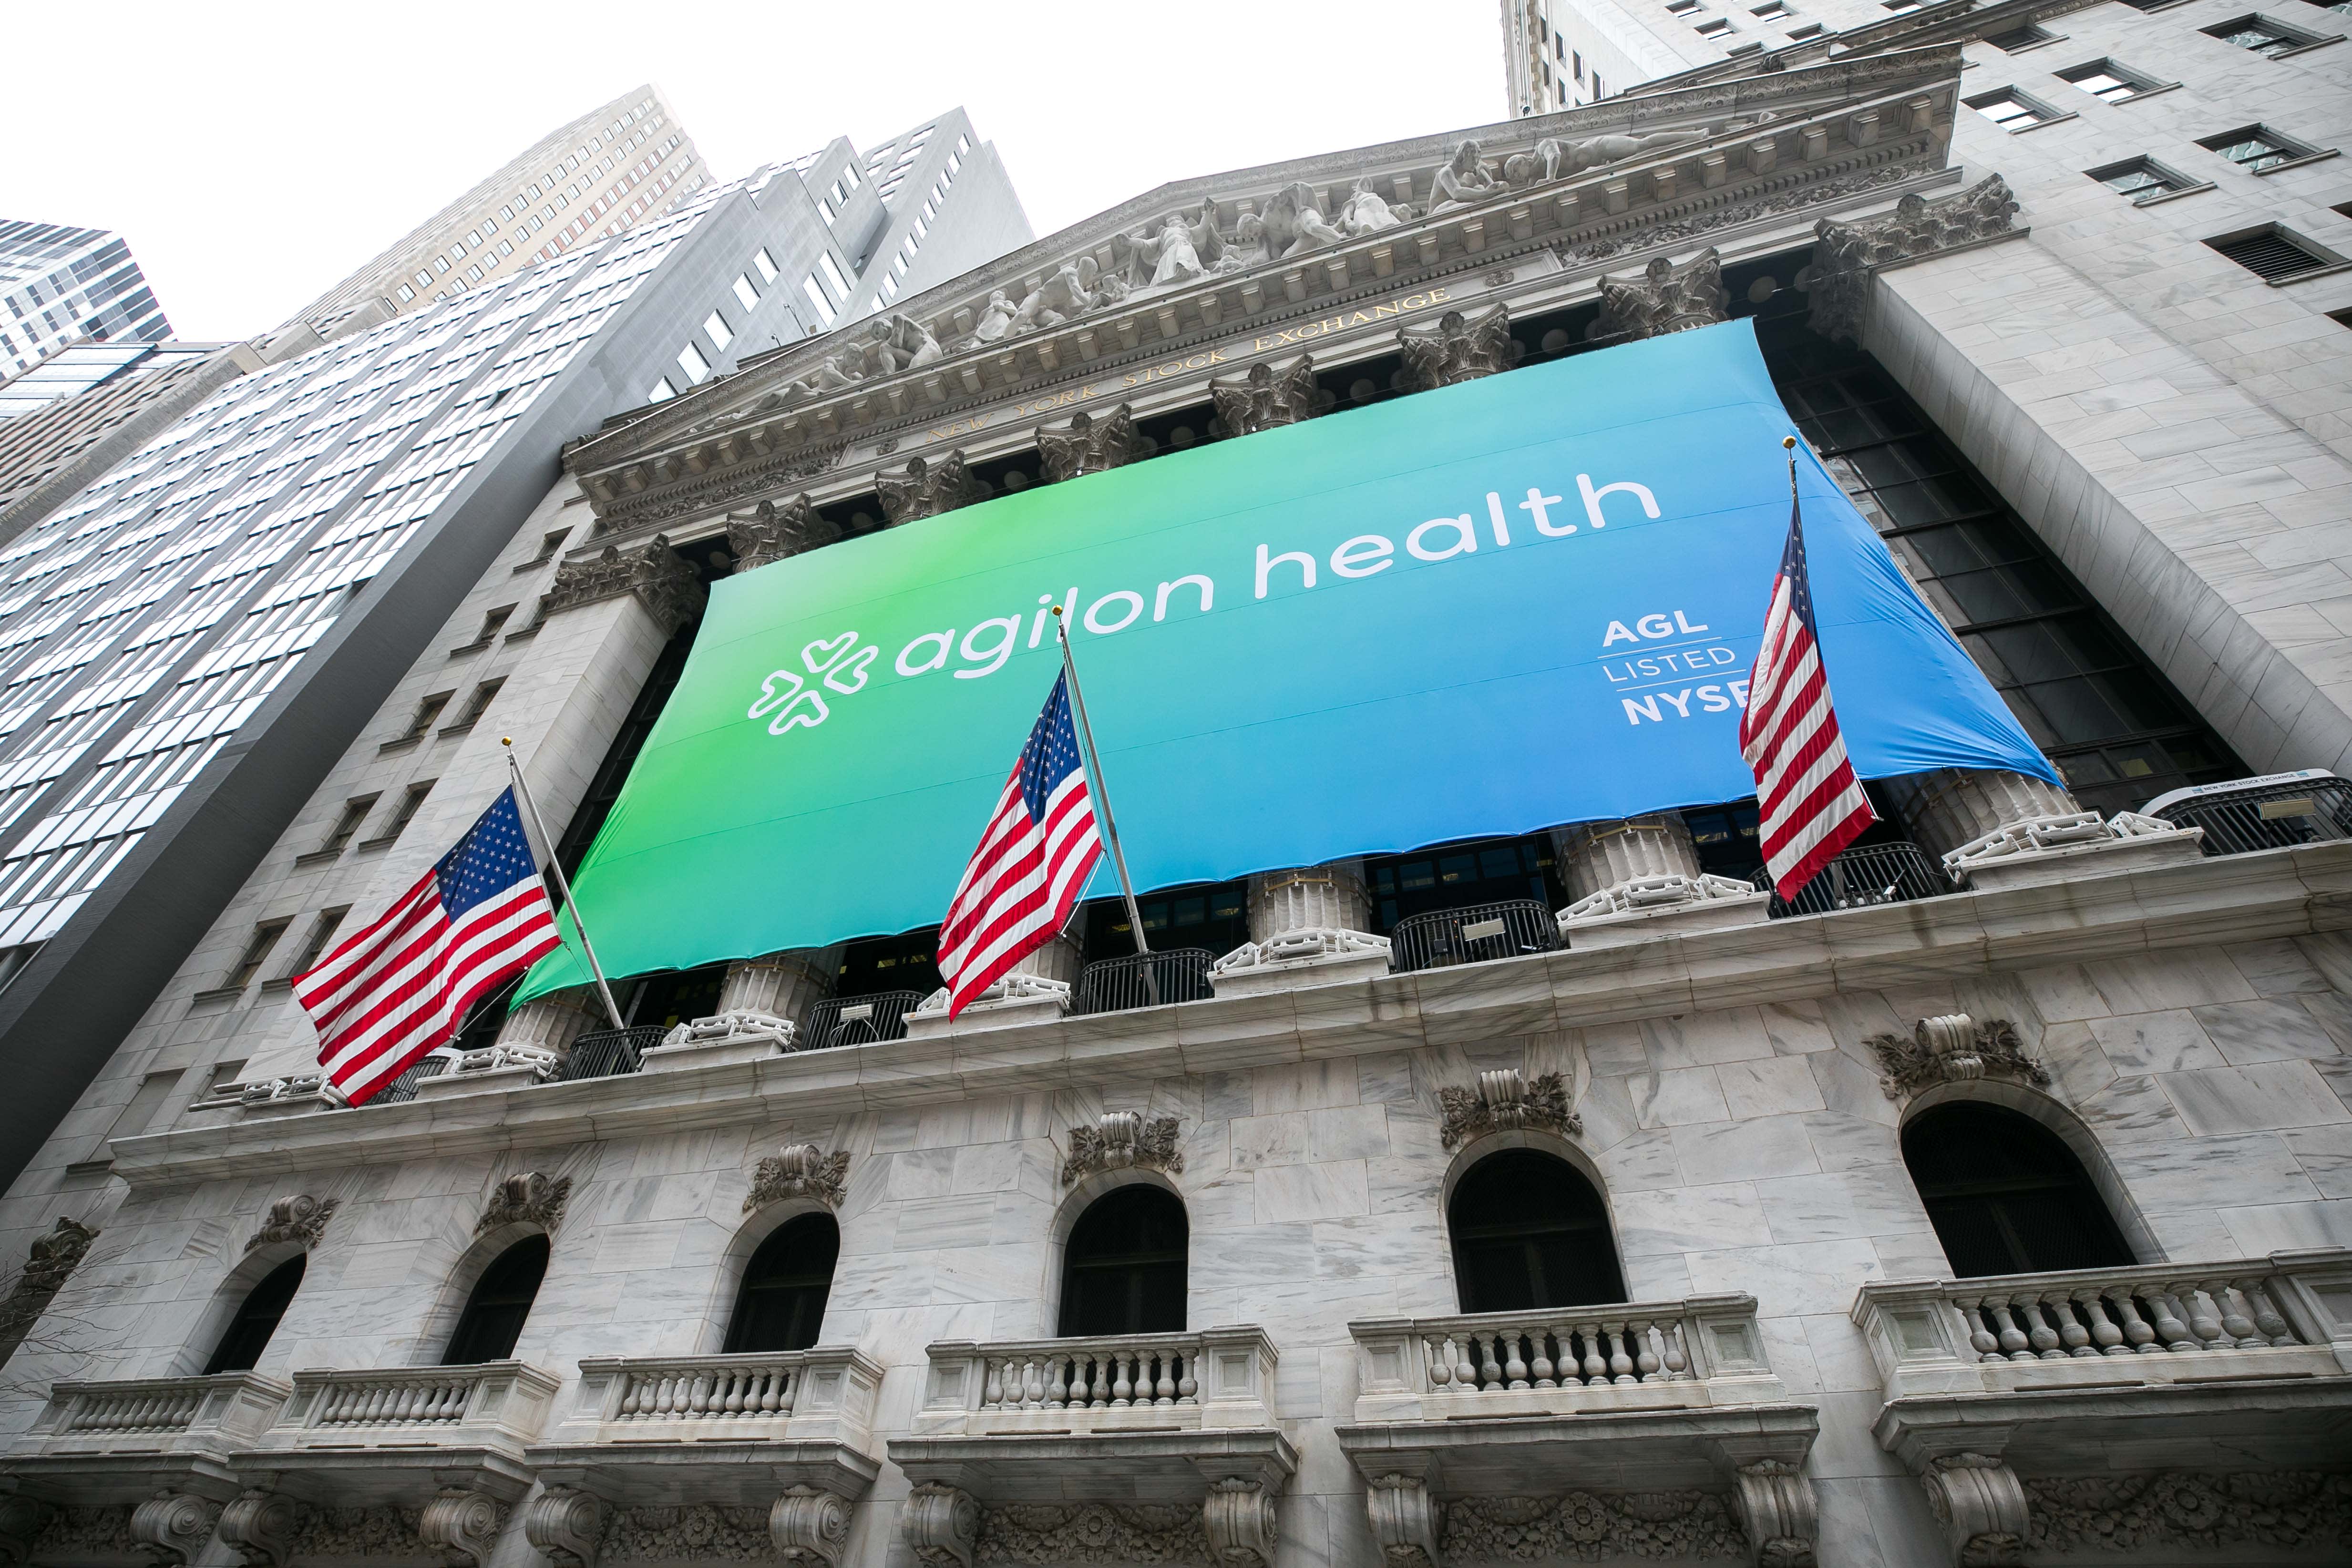 This little-known senior health care stock can surge more than 60{ac23b82de22bd478cde2a3afa9e55fd5f696f5668b46466ac4c8be2ee1b69550}, Goldman Sachs says